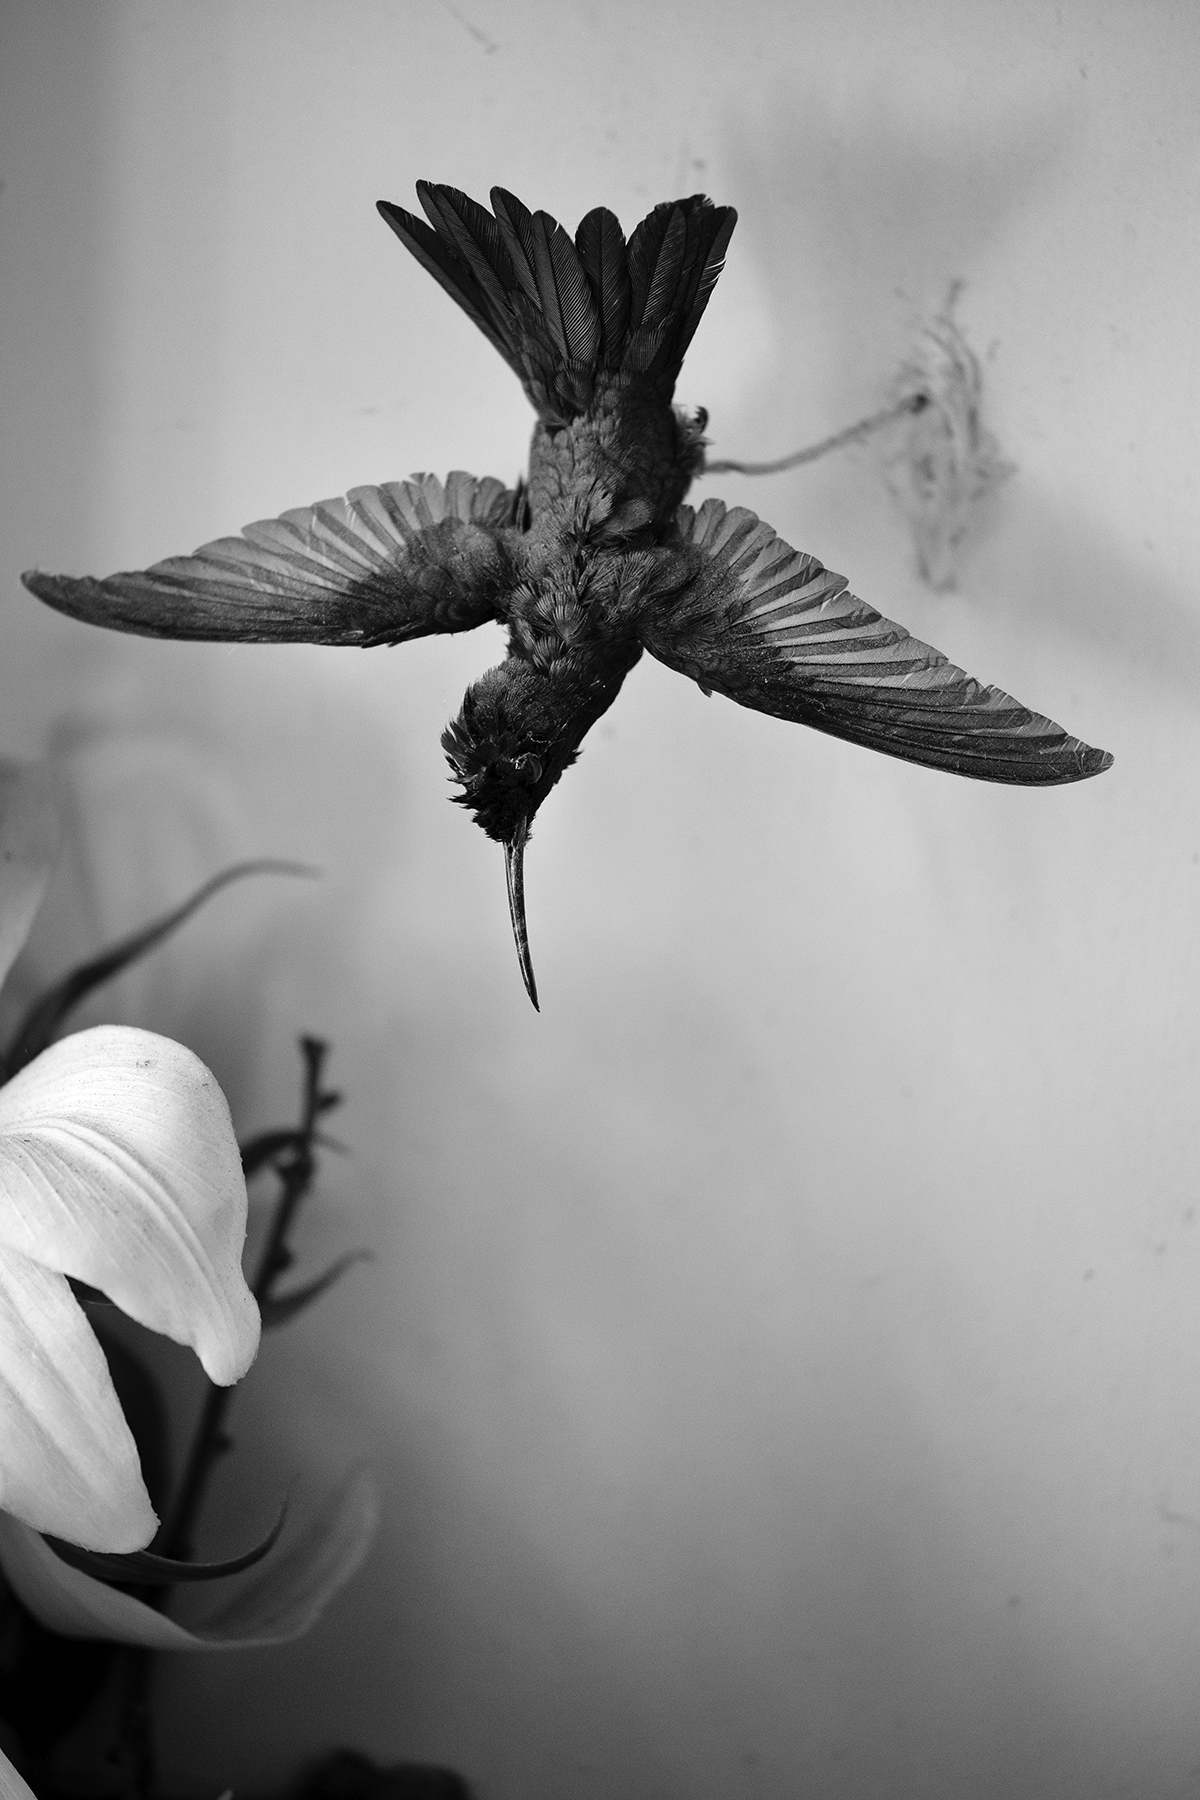 Mikkel Hørlyck, Jørgen, a Mystery – an embalmed bird hanging from a wired screwed into the wall